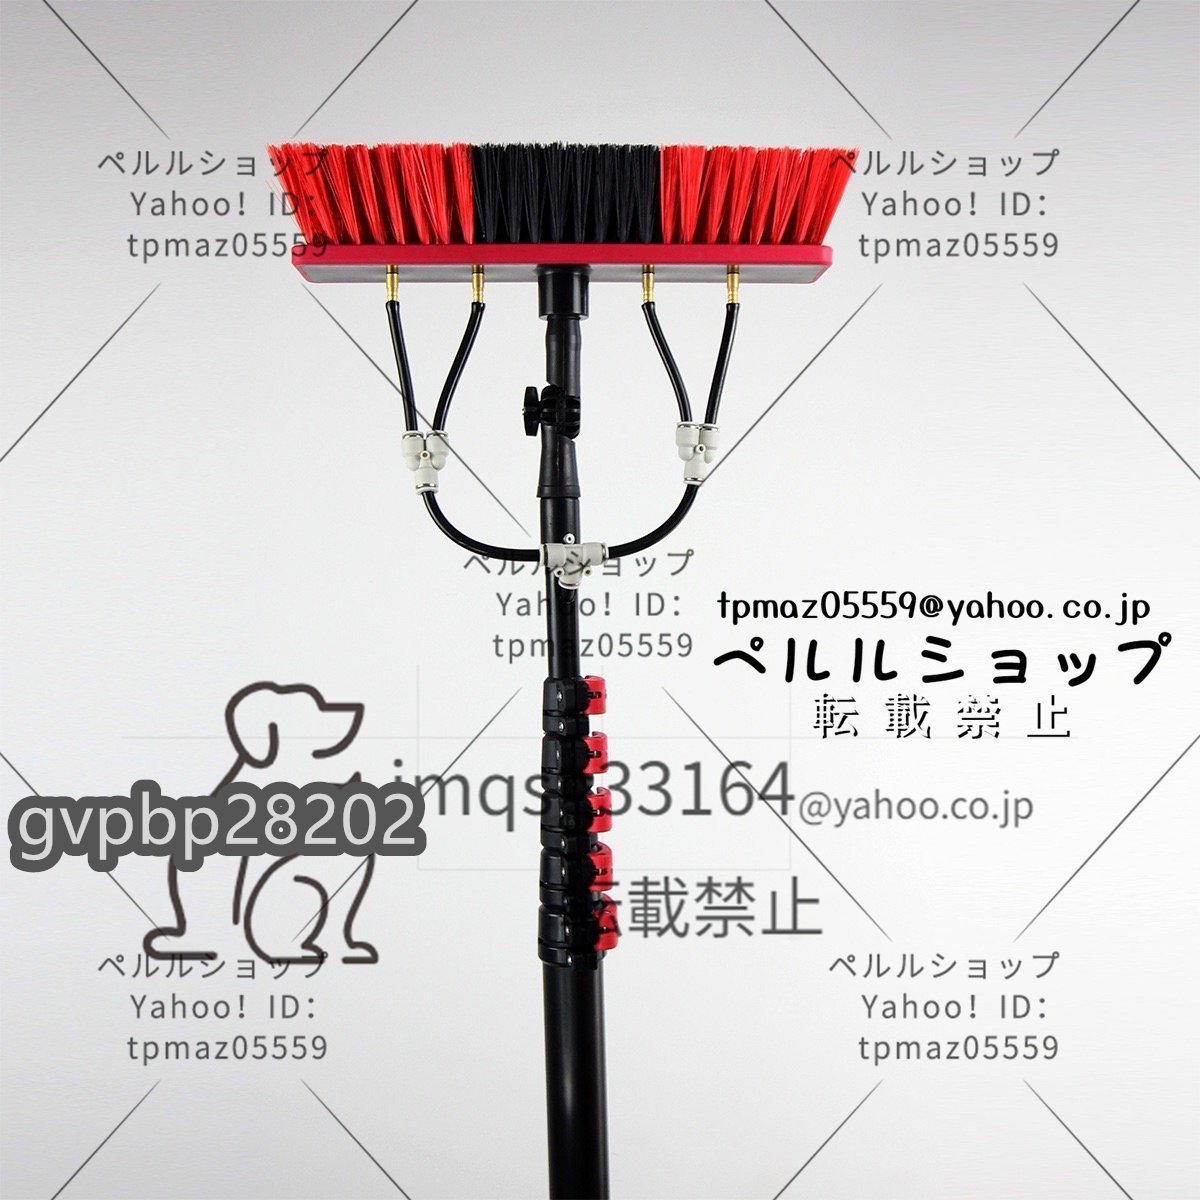  heights cleaning brush water sprinkling brush water supply flexible brush outer wall cleaning 35Cm brush head window glass / wall cleaning business use removed . easy 3.6m